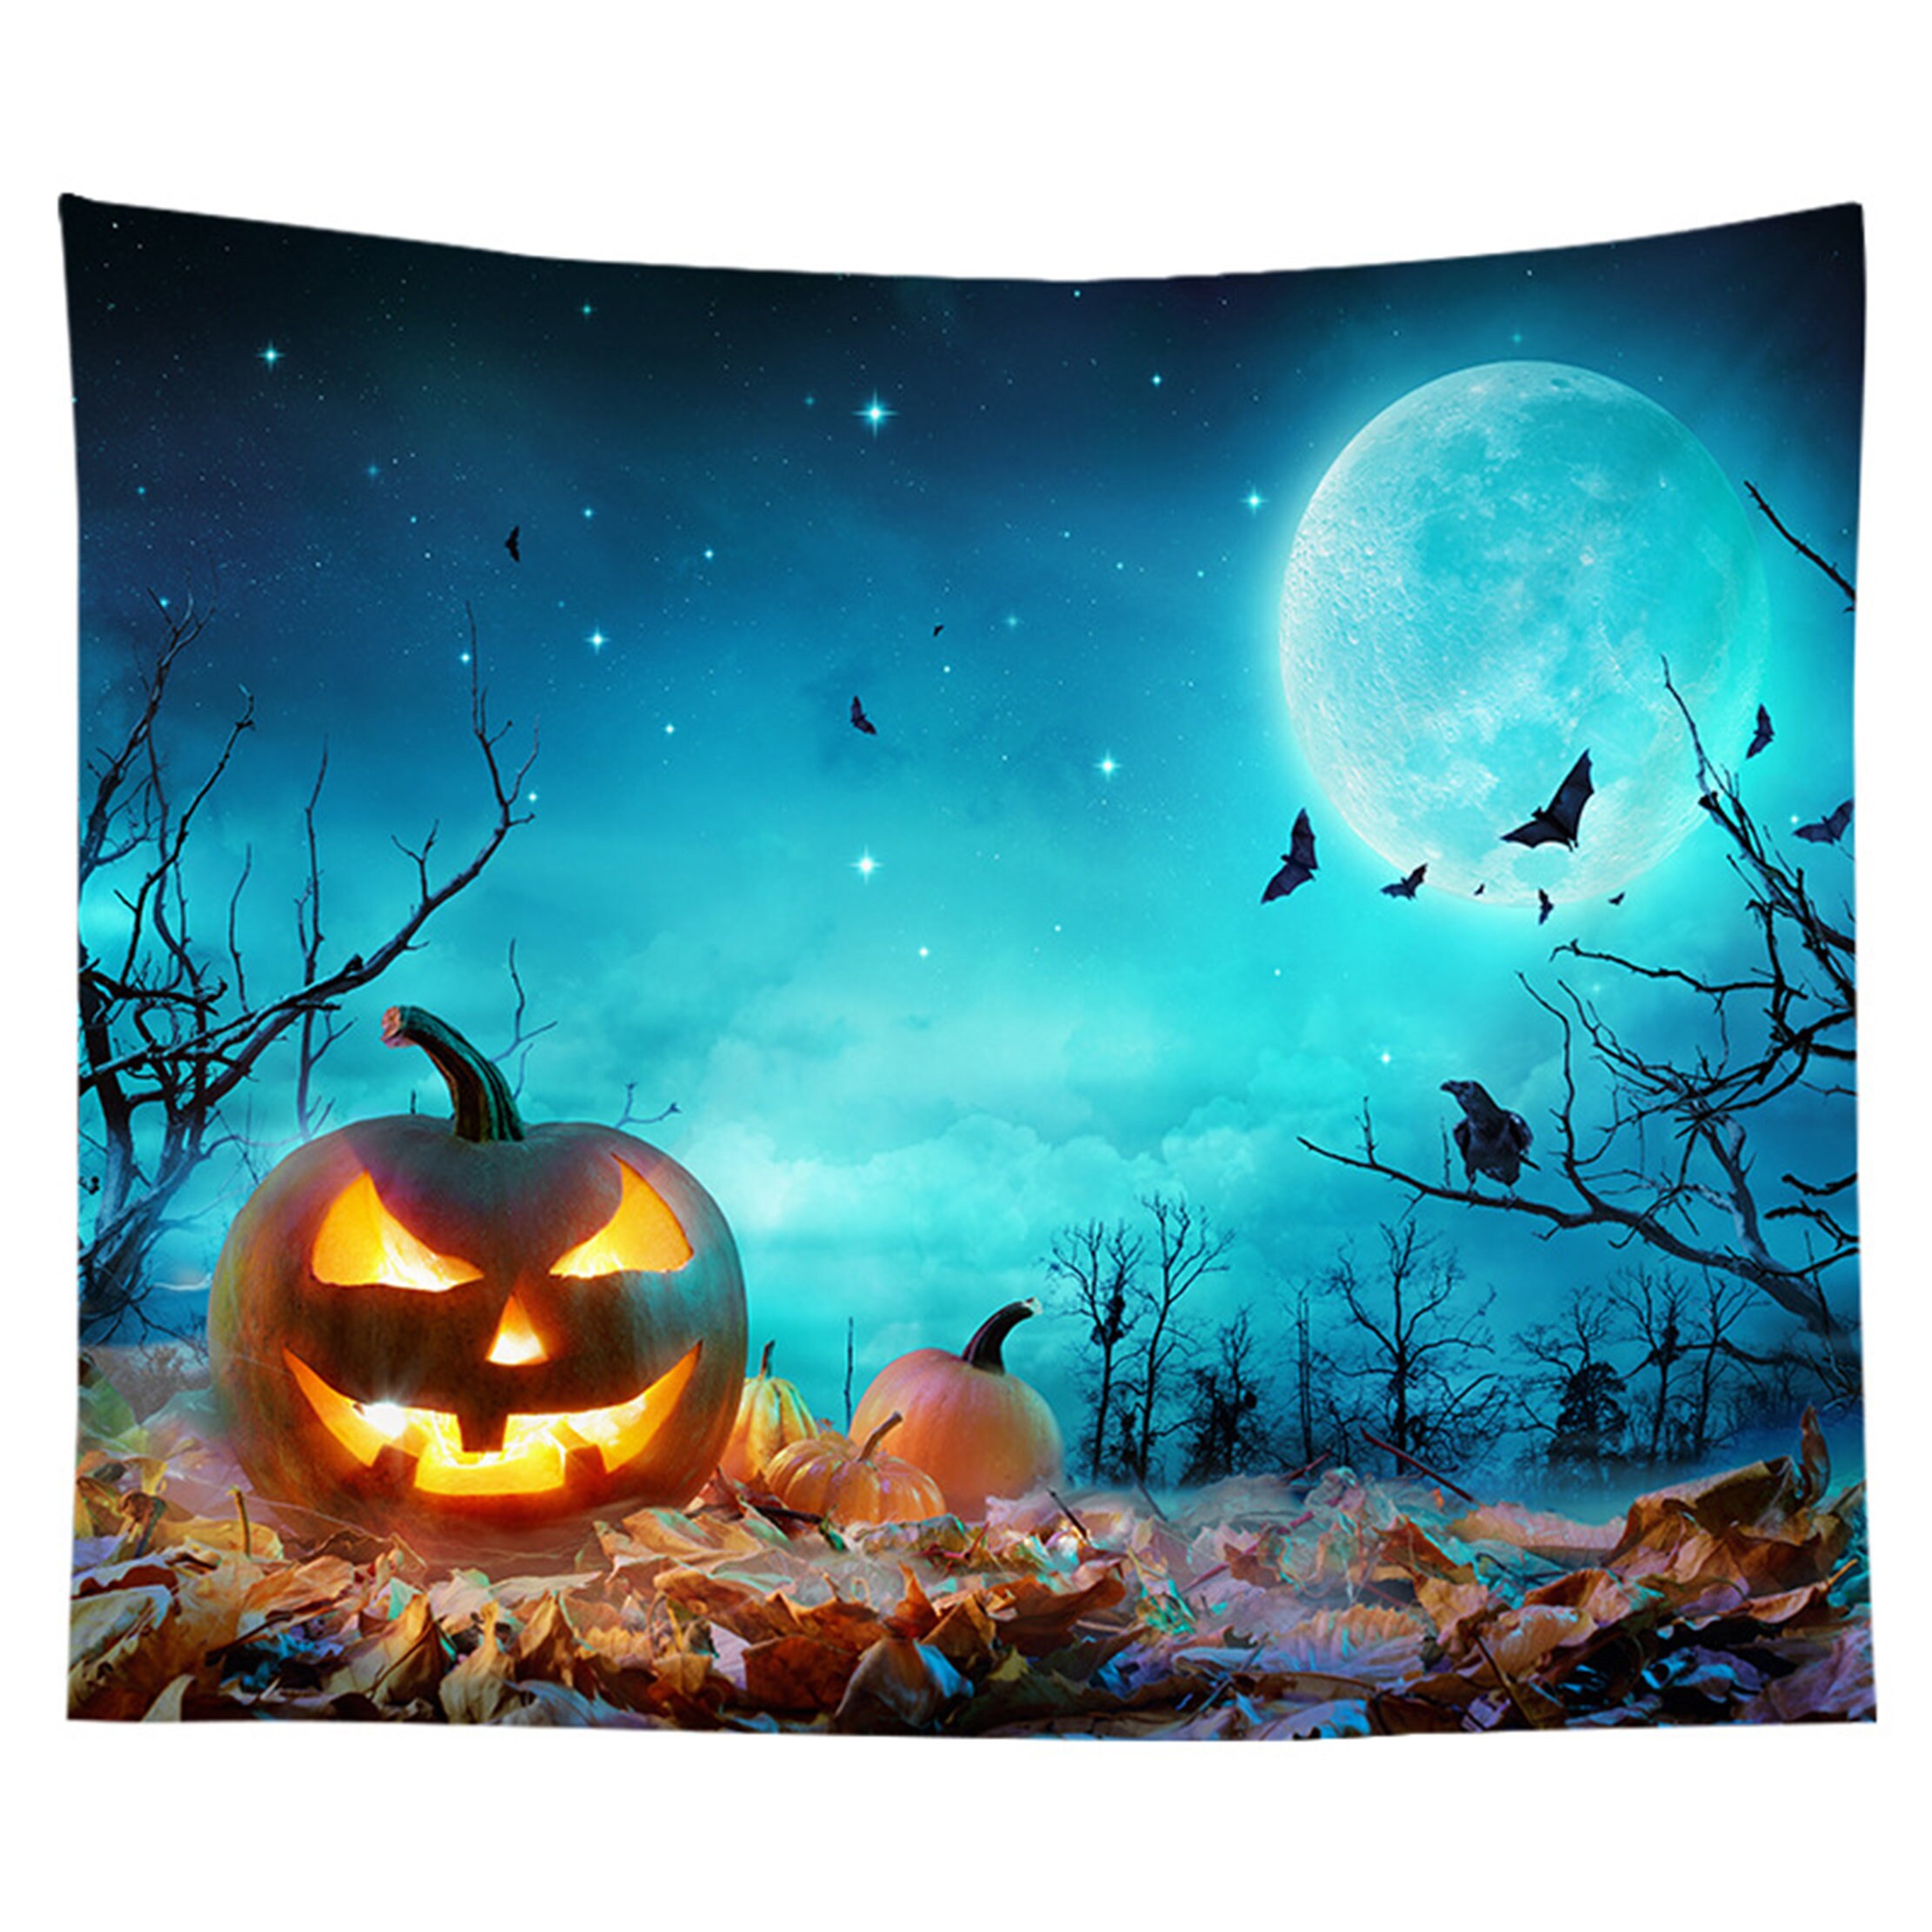 Discover Pumpkin Halloween Tapestry,Halloween Wall Tapestry,Wall Hanging for Halloween,Large Halloween Wall Art,Pumpkin Home Decor,Halloween Gift